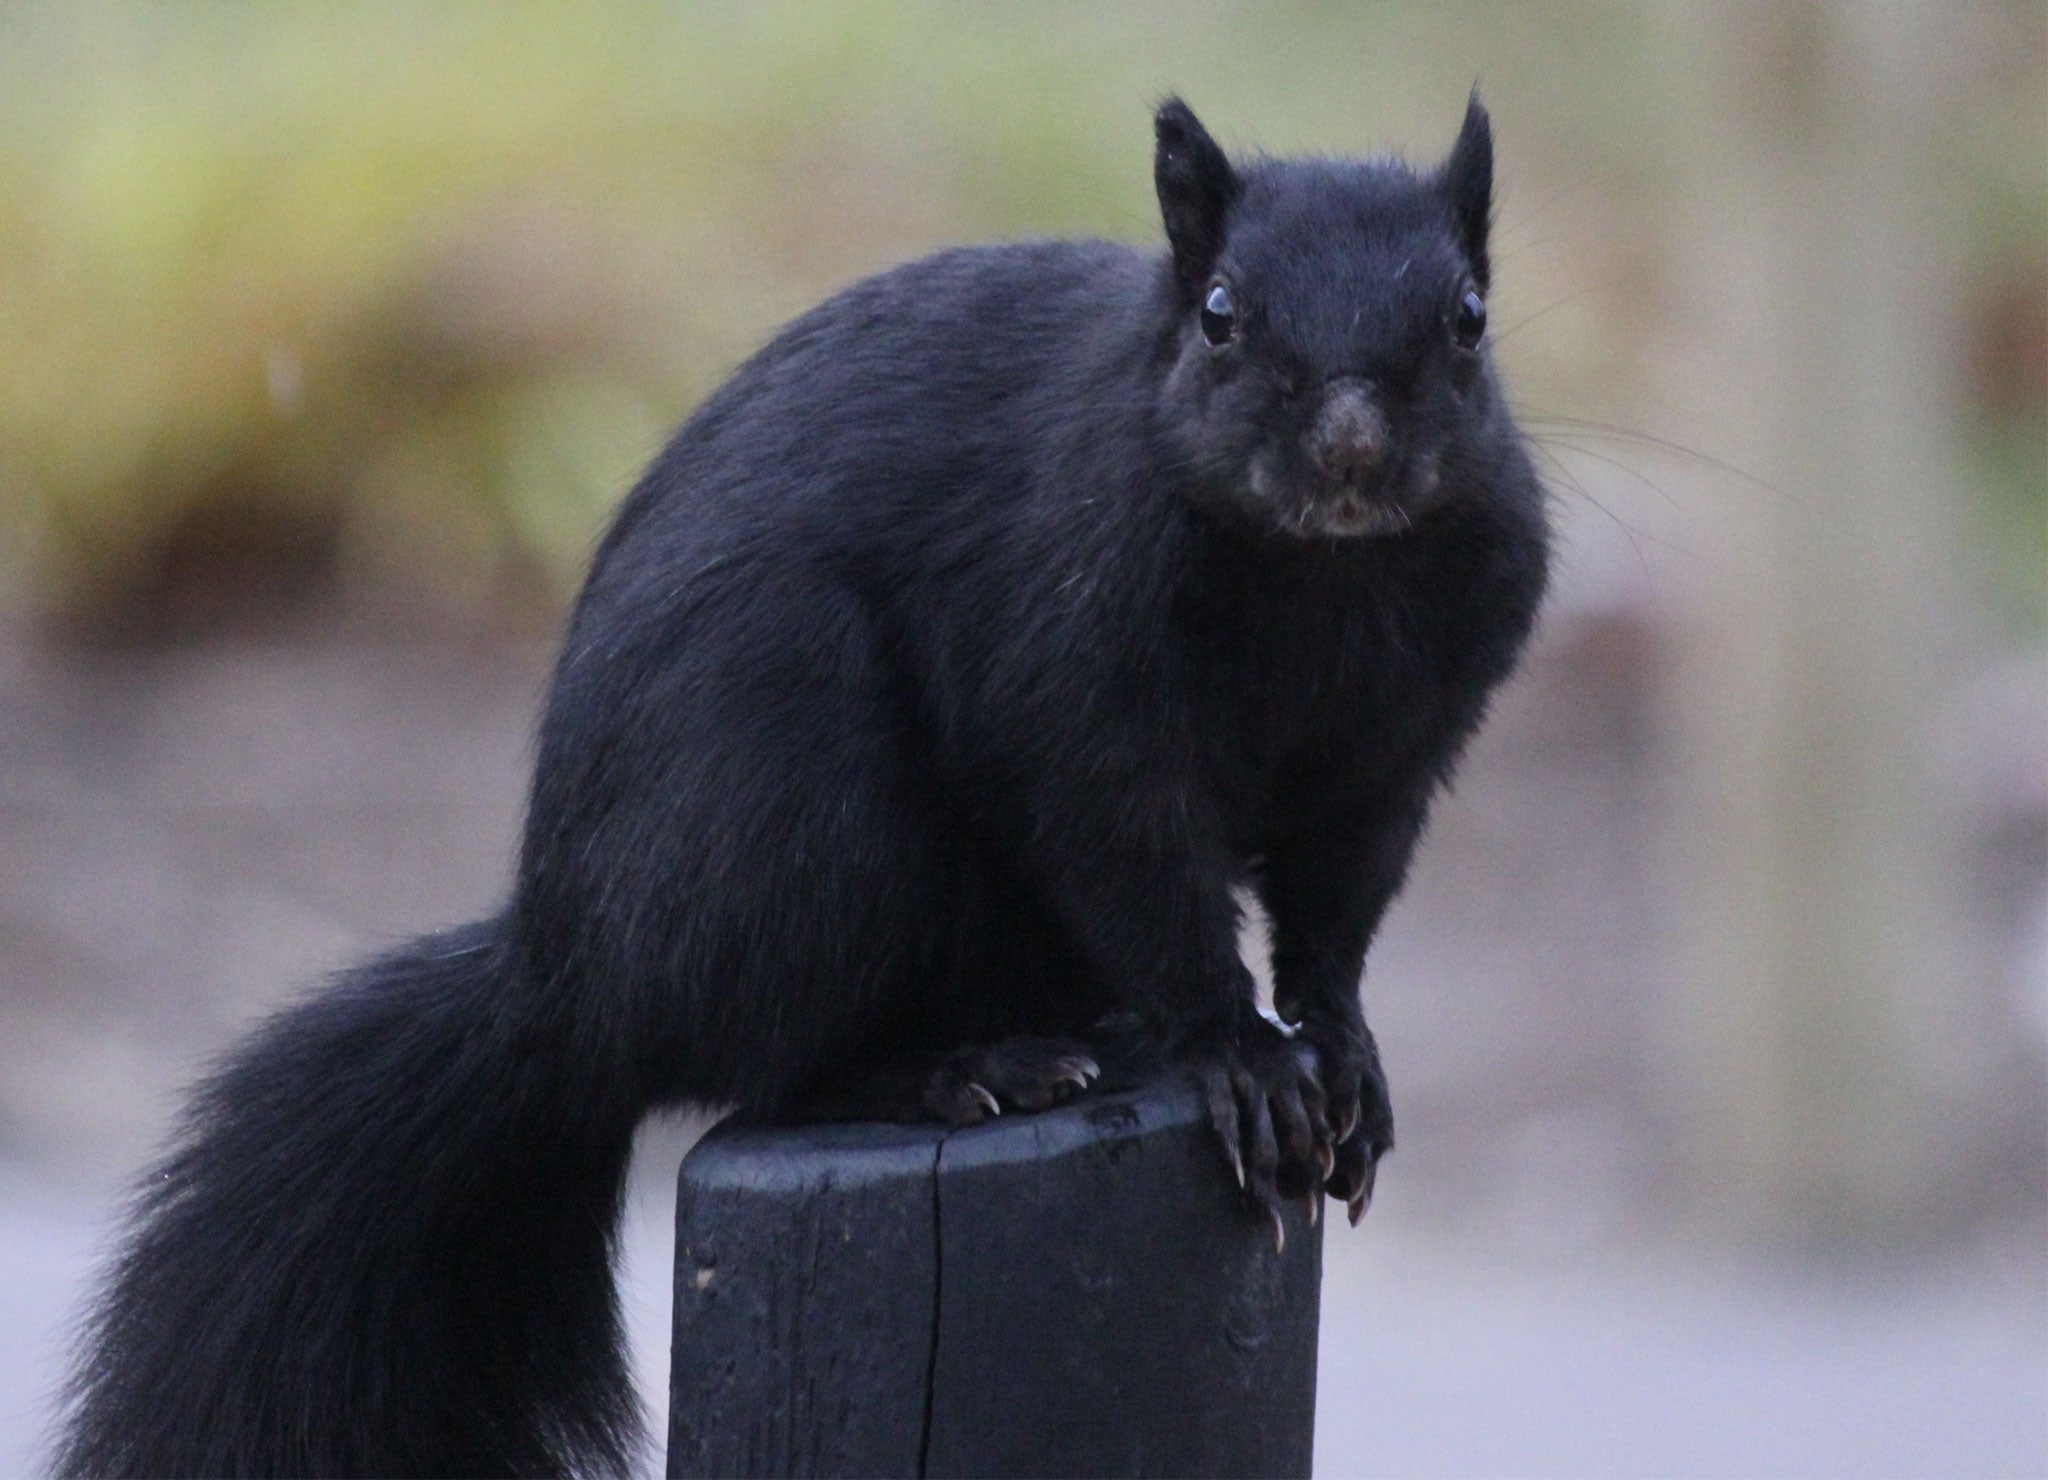 A black squirrel has become an internet sensation after footage of it repeatedly collapsing was uploaded to YouTube.